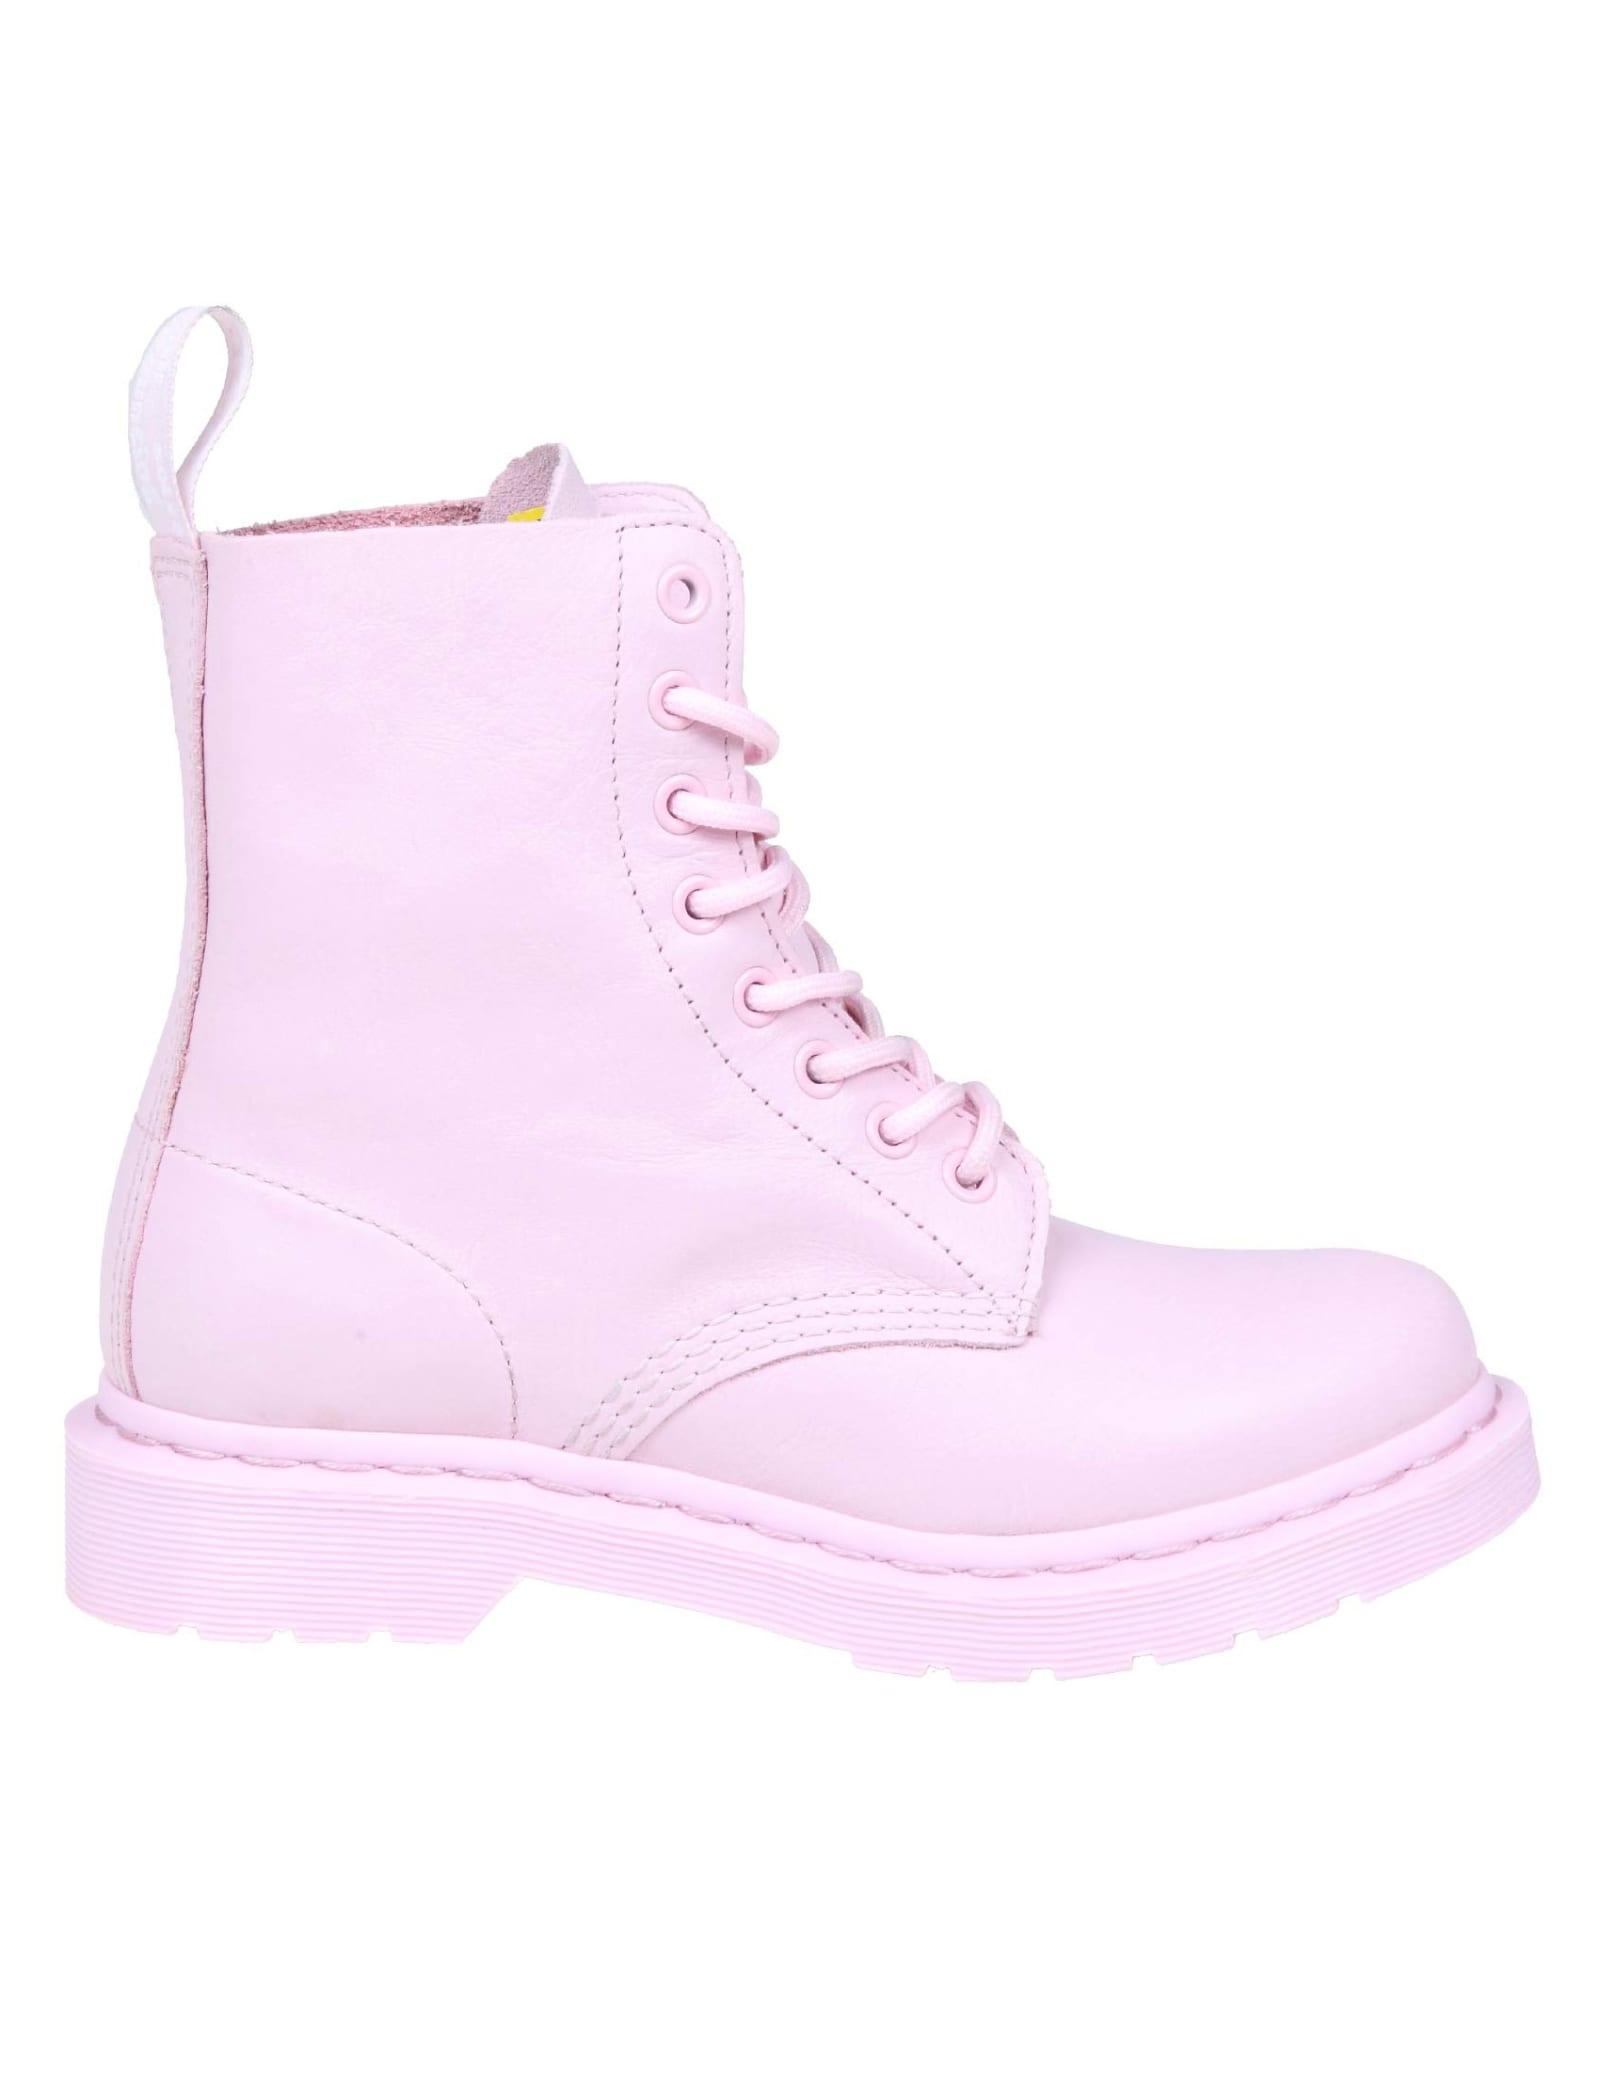 Dr. Martens 1460 Pascal Mono In Leather in Pink | Lyst